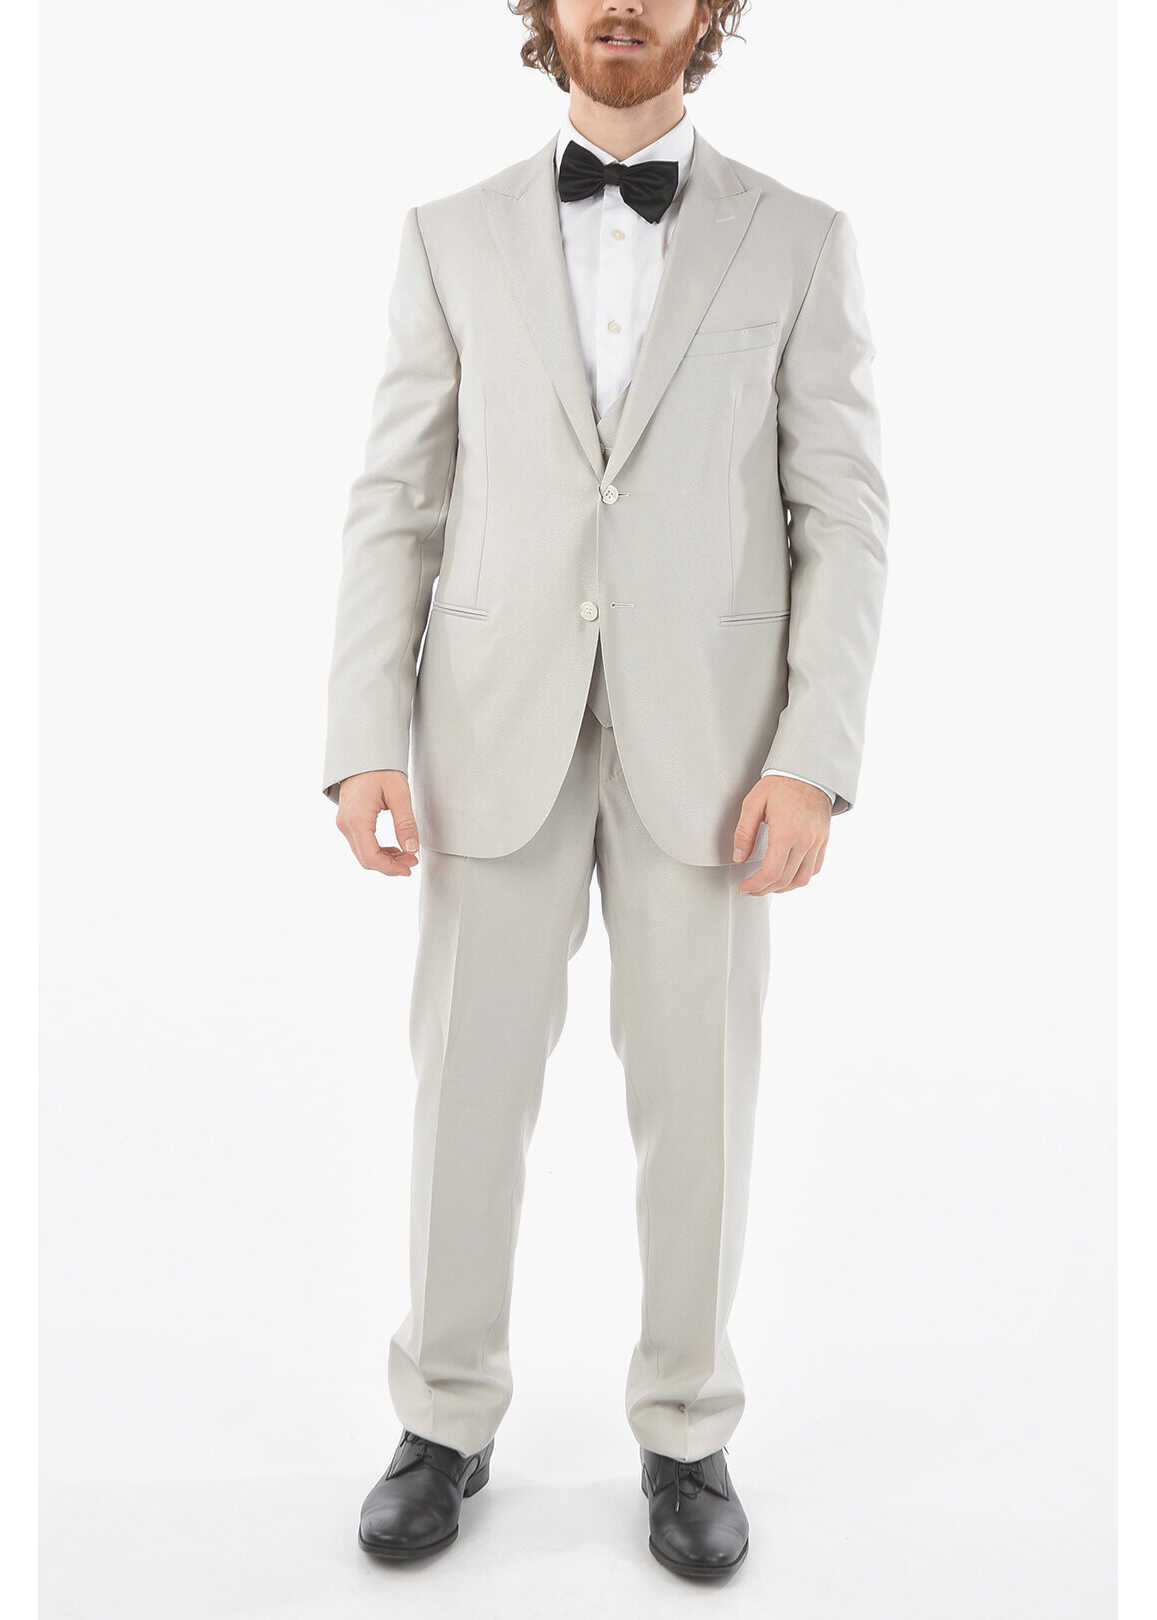 CORNELIANI Formal Lined Suit With Peak Lapel And Vest White